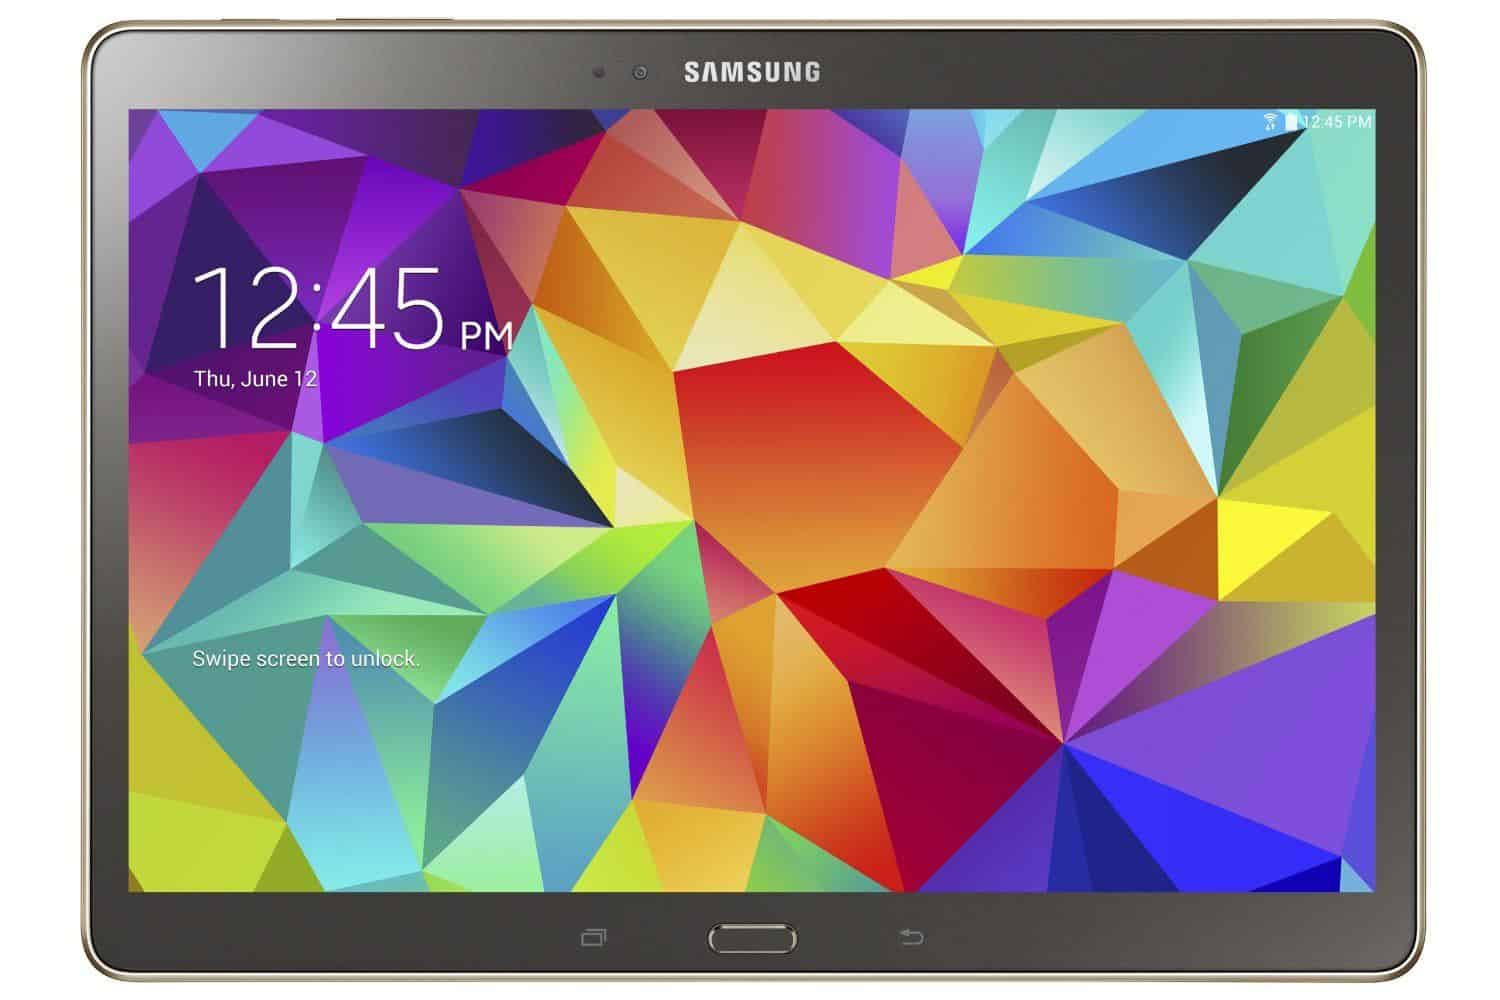 amazon Samsung Galaxy Tab S 10.5-Inch reviews Samsung Galaxy Tab S 10.5-Inch on amazon newest Samsung Galaxy Tab S 10.5-Inch prices of Samsung Galaxy Tab S 10.5-Inch Samsung Galaxy Tab S 10.5-Inch deals best deals on Samsung Galaxy Tab S 10.5-Inch buying a Samsung Galaxy Tab S 10.5-Inch lastest Samsung Galaxy Tab S 10.5-Inch what is a Samsung Galaxy Tab S 10.5-Inch Samsung Galaxy Tab S 10.5-Inch at amazon where to buy Samsung Galaxy Tab S 10.5-Inch where can i you get a Samsung Galaxy Tab S 10.5-Inch online purchase Samsung Galaxy Tab S 10.5-Inch sale off discount cheapest Samsung Galaxy Tab S 10.5-Inch  Samsung Galaxy Tab S 10.5-Inch for sale samsung galaxy tab s 10.5-inch 16gb tablet with android 4.4 samsung galaxy tab s 10.5-inch tablet accessories samsung galaxy tab s 10.5-inch tablet amazon samsung galaxy tab s 10.5-inch tablet vs ipad air best price for samsung galaxy tab s 10.5-inch tablet best buy samsung galaxy tab s 10.5-inch tablet buy samsung galaxy tab s 10.5-inch tablet best samsung galaxy tab s 10.5-inch tablet case belk protective sleeve for samsung galaxy tab s 10.5 inch samsung bluetooth keyboard for samsung galaxy tab s 10.5 inch samsung bluetooth keyboard for samsung galaxy tab s 10.5 inch - electric brown samsung bluetooth keyboard for samsung galaxy tab s 10.5 inch - dazzling white samsung book case cover for samsung galaxy tab s 10.5 inch samsung galaxy tab s 10.5-inch tablet (bronze) costco samsung galaxy tab s 10.5-inch tablet gumdrop cases samsung galaxy tab s 10.5-inch fintie samsung galaxy tab s 10.5 (10.5-inch) smart shell case samsung galaxy tab s 10.5-inch tablet case samsung galaxy tab s 10.5 inch quad core processor samsung slim case cover for galaxy tab s 10.5 inch - brown samsung galaxy tab s 10.5 inch bluetooth® keyboard cover samsung galaxy tab s 10.5-inch tablet cover samsung slim case cover for galaxy tab s 10.5 inch otterbox defender series for 10.5-inch samsung galaxy tab s samsung galaxy tab s 10.5-inch tablet (16gb dazzling white) samsung galaxy tab s 10.5-inch tablet deals otterbox defender series for 10.5-inch samsung galaxy tab s black samsung galaxy tab s t805 (10.5-inch wifi) dazzling white samsung galaxy tab s 10.5-inch tablet black friday deals ebay samsung galaxy tab s 10.5-inch tablet samsung galaxy tab s (10.5 inch ) wifi 16gb samsung galaxy tab s 10.5-inch tablet (16gb titanium samsung galaxy tab s 10.5 inch 32gb samsung galaxy tab s 10.5-inch tablet 16gb black samsung galaxy tab s 10.5-inch tablet gsmarena samsung galaxy tab s 10.5 inch 16gb samsung galaxy tab s 10.5-inch tablet (16gb samsung galaxy tab s 10.5-inch tablet 32 gb harga samsung galaxy tab s 10.5-inch tablet harga samsung galaxy tab s 10.5 inch samsung galaxy tab s 10.5-inch tablet hdmi samsung galaxy tab s 10.5-inch tablet price in india samsung galaxy tab s 10.5 inch price in pakistan samsung galaxy tab s 10.5-inch tablet india samsung galaxy tab s 10.5 inch in india samsung galaxy tab s 10.5-inch tablet price in bd samsung galaxy tab s 10.5-inch tablet keyboard samsung galaxy tab s 10.5 inch keyboard samsung galaxy tab s 10.5 inch bluetooth® keyboard cover - white samsung galaxy tab s 10.5 inch bluetooth klavye beyaz samsung galaxy tab s 10.5 inch bluetooth klavye samsung galaxy tab s 10.5-inch tablet lollipop samsung galaxy tab s 10.5-inch tablet battery life samsung galaxy tab s 10.5 inch lte samsung galaxy tab s 10.5-inch battery life samsung galaxy tab s 10.5 inch lte sm-t805 samsung galaxy tab s 10.5-inch tablet lte samsung galaxy tab s 10.5-inch tablet manual samsung galaxy tab s 10.5-inch tablet micro sd samsung galaxy tab s 10.5 inch tablet user manual samsung galaxy tab s met 4g (10.5 inch) - titanium bronze samsung galaxy tab s 10.5-inch tablet new samsung galaxy tab s 10.5-inch tablet price samsung galaxy tab s 10.5 inch price samsung screen protector for galaxy tab s 10.5 inch - clear samsung galaxy tab s 16gb 10.5 inch pret review samsung galaxy tab s 10.5-inch tablet samsung galaxy tab s 10.5 inch tablet - 16gb review samsung galaxy tab s 10.5-inch tablet refurbished samsung galaxy tab s 10.5-inch tablet screen replacement speck samsung galaxy tab s 10.5 inch stylefolio spesifikasi samsung galaxy tab s 10.5 inch samsung galaxy tab s 10.5-inch tablet specs samsung galaxy tab s 10.5 inch tablet - 16gb samsung galaxy tab s 10.5-inch tablet review samsung galaxy tab s 10.5-inch tablet 32gb samsung galaxy tab s t801 10.5 inch 16g samsung galaxy tab s 10.5-inch tablet(white) samsung galaxy tab s 10.5-inch tablet uk samsung galaxy tab s 10.5 inch tablet - 16gb uk samsung galaxy tab s 10.5 inch unicorn beetle samsung galaxy tab s 10.5-inch tablet verizon samsung galaxy tab s t805 (10.5-inch wifi) samsung galaxy tab s 10.5-inch tablet 16gb white samsung galaxy tab s 10.5-inch tablet warranty samsung galaxy tab s 10.5-inch tablet wiki samsung galaxy tab s 10.5-inch tablet youtube samsung galaxy tab s 16gb 10.5 inch 4g bronze samsung galaxy tab s 16gb 10.5 inch samsung galaxy tab s 10.5-inch tablet (32gb titanium bronze) samsung galaxy tab s 10.5-inch tablet 4g samsung galaxy tab s 16gb 10.5 inch 4g samsung galaxy tab s 10.5 inch 4g samsung galaxy tab s 10.5 inch 4g t805 samsung book cover for galaxy tab s 10.5-inch samsung galaxy tab s 10.5-inch tablet best buy samsung galaxy tab s 10.5-inch tablet costco samsung galaxy tab s 10.5-inch tablet ebay samsung folio book case cover for galaxy tab s 10.5 inch samsung sm-t805 galaxy tab s 10.5-inch samsung galaxy tab s 10.5-inch tablet sale samsung galaxy tab s titanium bronze 10.5 inch sm-t805 samsung galaxy tab s 10.5 inch specifications samsung galaxy tab s 10.5-inch tablet samsung galaxy tab s 10.5-inch samsung galaxy tab s 10.5-inch tablet (16gb titanium bronze) samsung galaxy tab s 10.5-inch tablet charger samsung galaxy tab s sm-t805 10.5 inch samsung galaxy tab s sm-t805 tablet (10.5-inch samsung galaxy tab s t801 10.5 inch samsung galaxy tab s t805 (10.5-inch wifi) titanium bronze samsung galaxy tab s 16gb 10.5-inch tablet samsung galaxy tab s 10.5 inch bluetooth keyboard samsung galaxy tab s (10.5 inch) - titanium bronze samsung galaxy tab s 10.5-inch tablet black friday samsung galaxy tab s 10.5 inch case samsung galaxy tab s 10.5-inch case cover fyy samsung galaxy tab s 10.5-inch tablet canada samsung galaxy tab s 10.5-inch tablet for sale samsung galaxy tab s 10.5-inch wi-fi (sm-t800) samsung galaxy tab s 10.5-inch tablet features samsung galaxy tab s 10.5 inch price in india samsung galaxy tab s 10.5-inch manual samsung galaxy tab s 10.5-inch tablet best price samsung galaxy tab s 10.5-inch review samsung galaxy tab s (10.5-inch white) samsung galaxy tab s 10.5-inch - white - sm-t800ntw samsung galaxy tab s 10.5-inch tablet Walmart